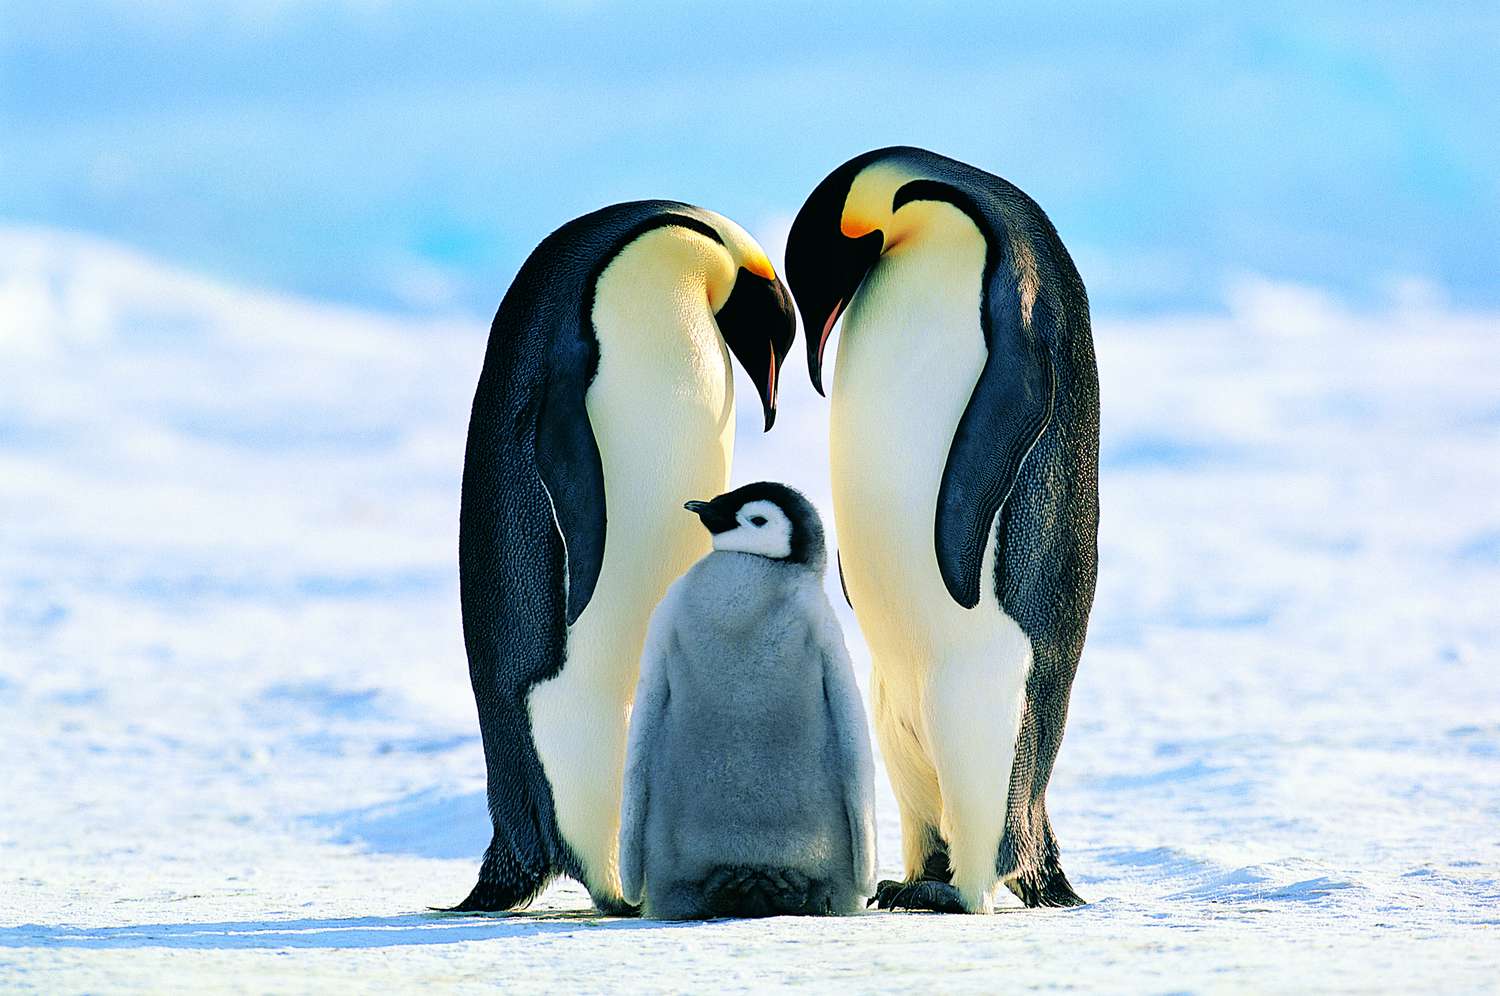 🚢 Journey Around the World in 24 Questions – How Well Can You Score? Emperor Penguins